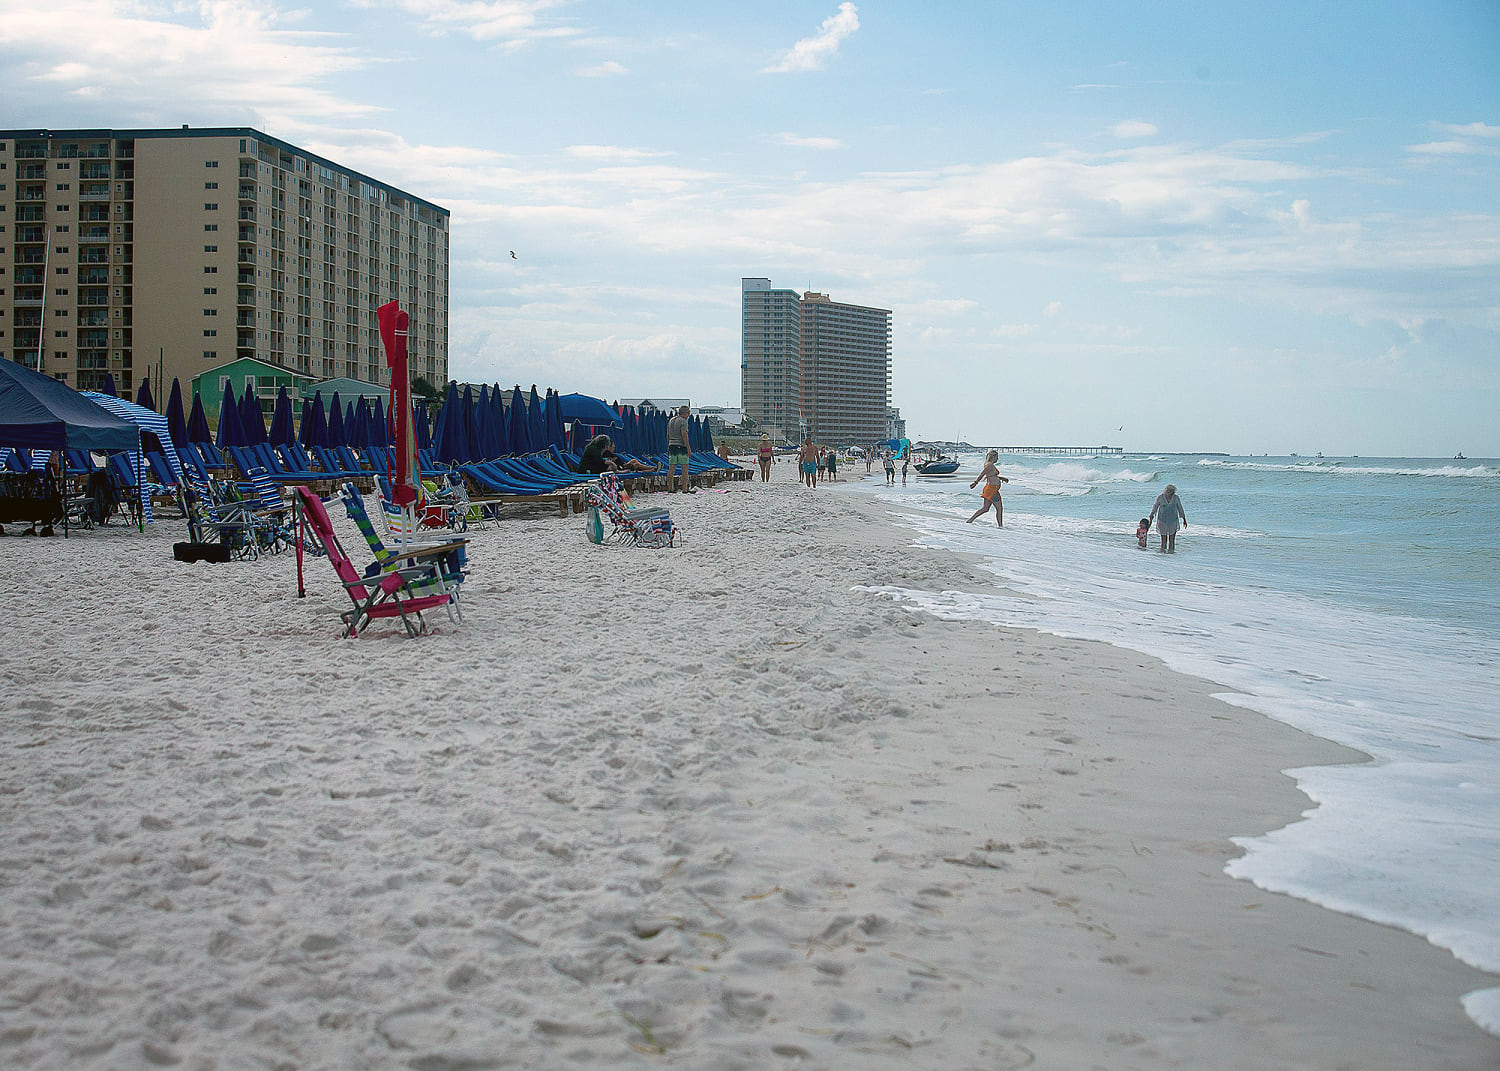 Three Alabama men drown at a Florida beach after getting caught in rip current